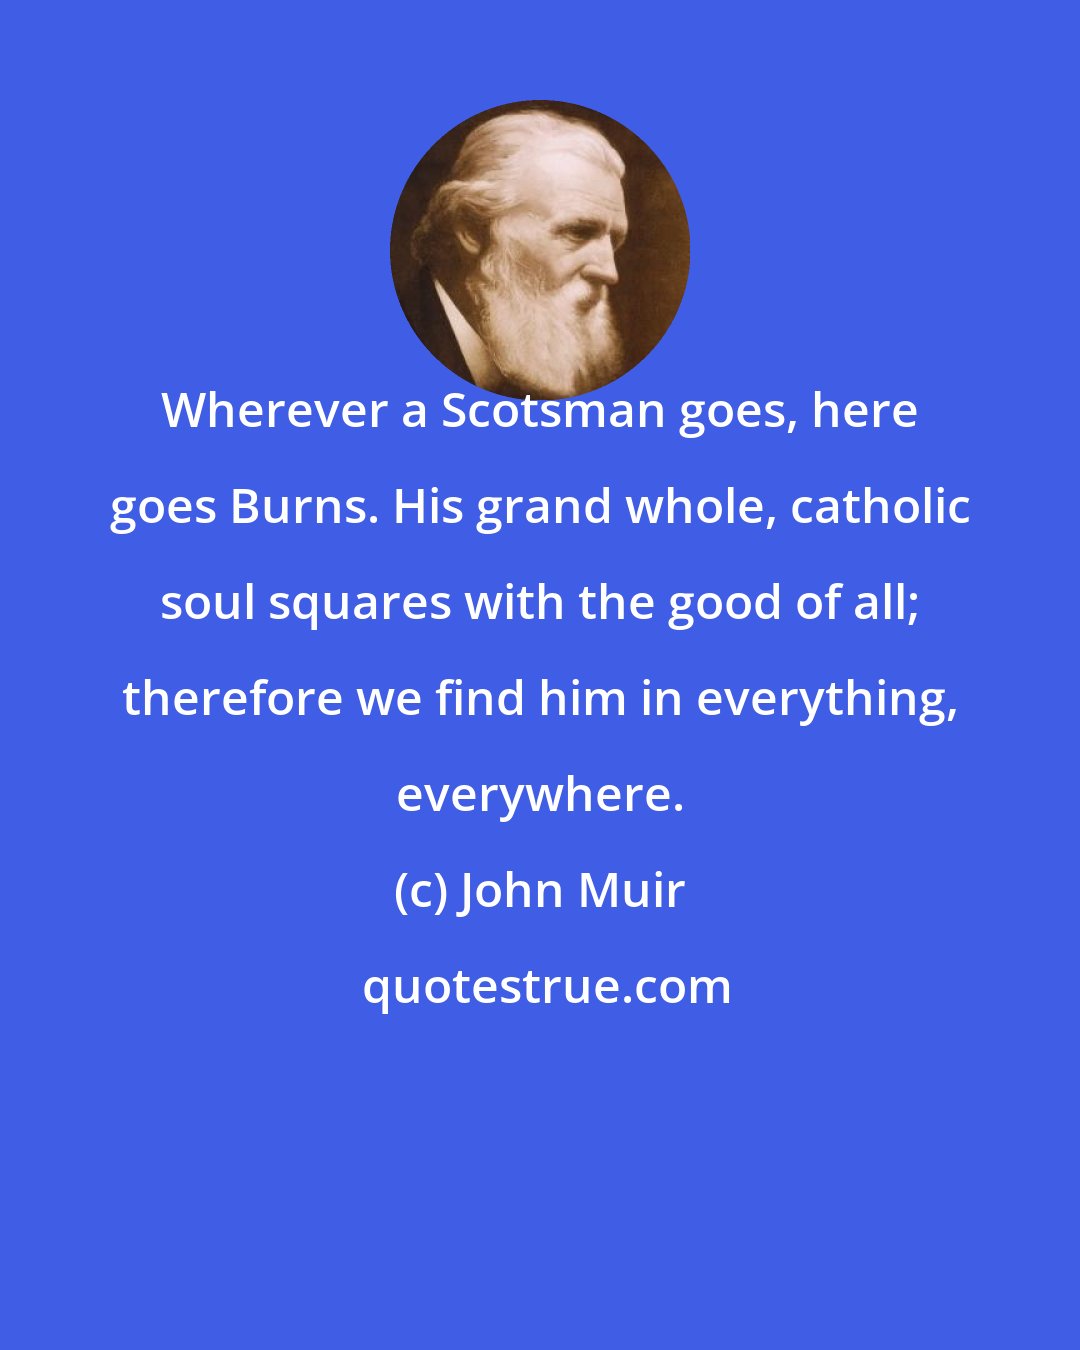 John Muir: Wherever a Scotsman goes, here goes Burns. His grand whole, catholic soul squares with the good of all; therefore we find him in everything, everywhere.